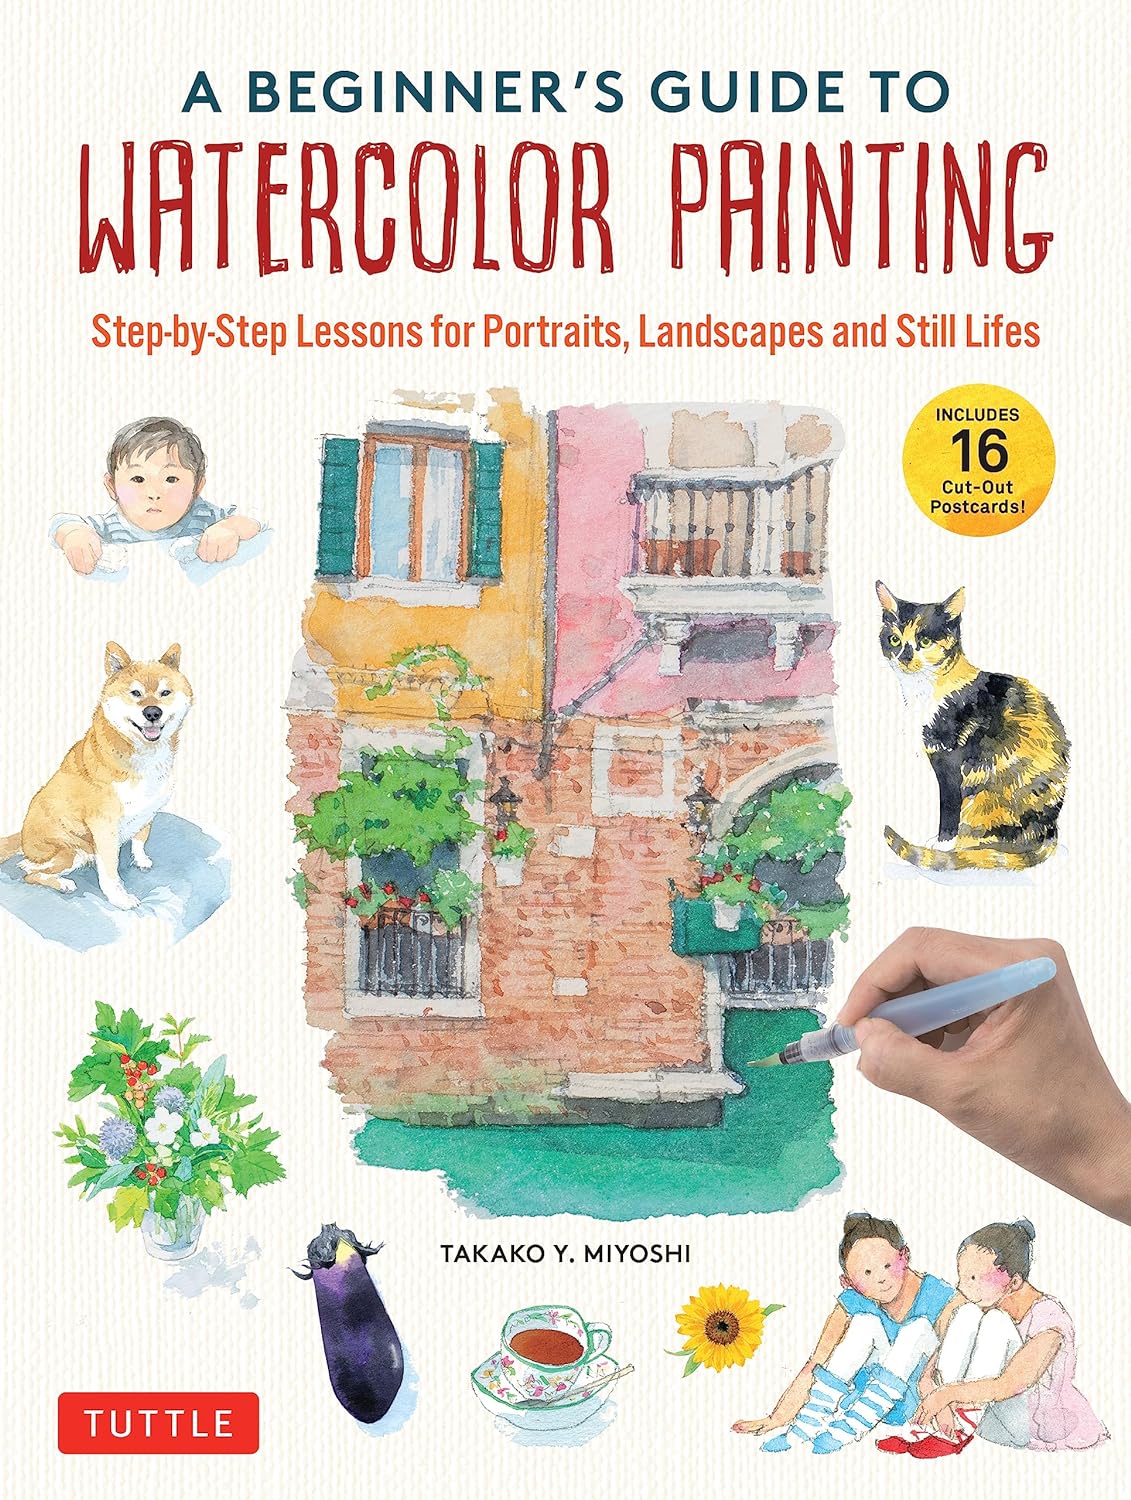 A Beginner's Guide to Watercolor Painting